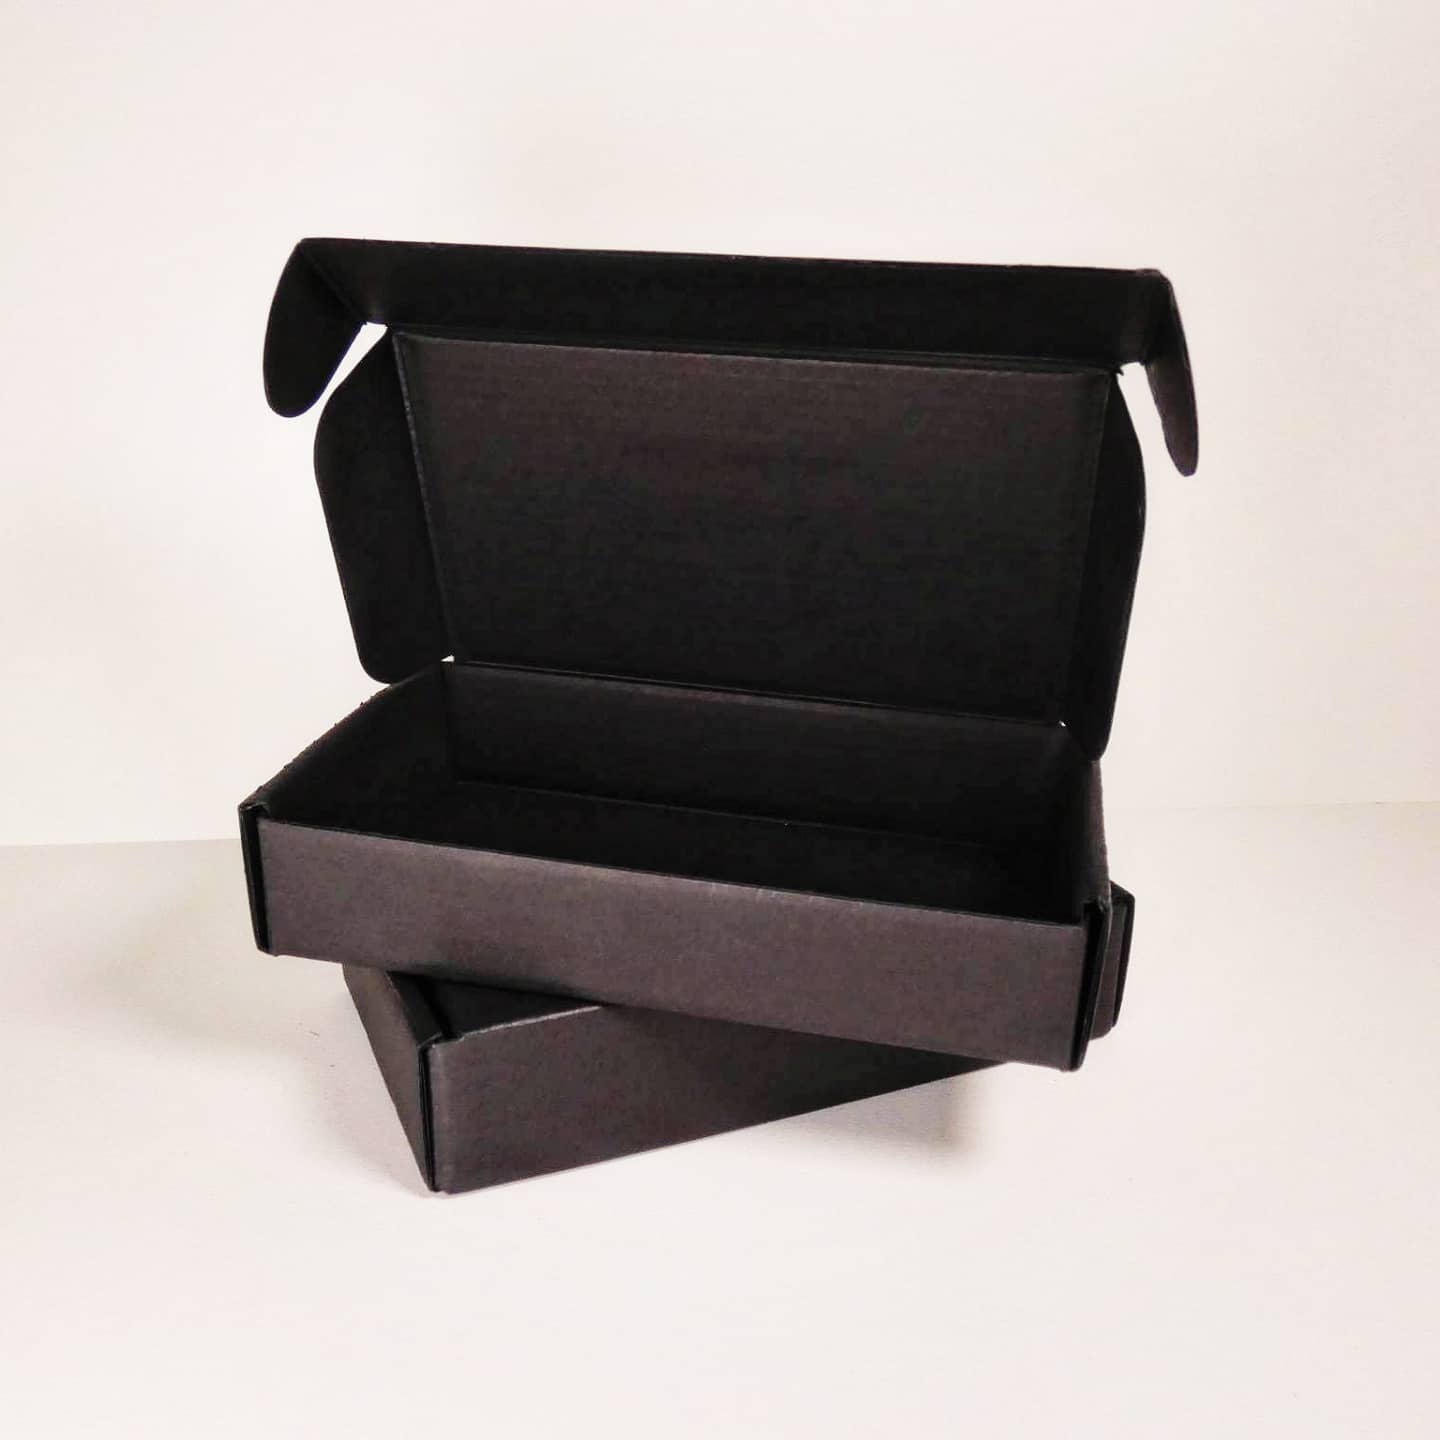 Get Premium Packaging by Using Black Mailer Boxes for Your Business